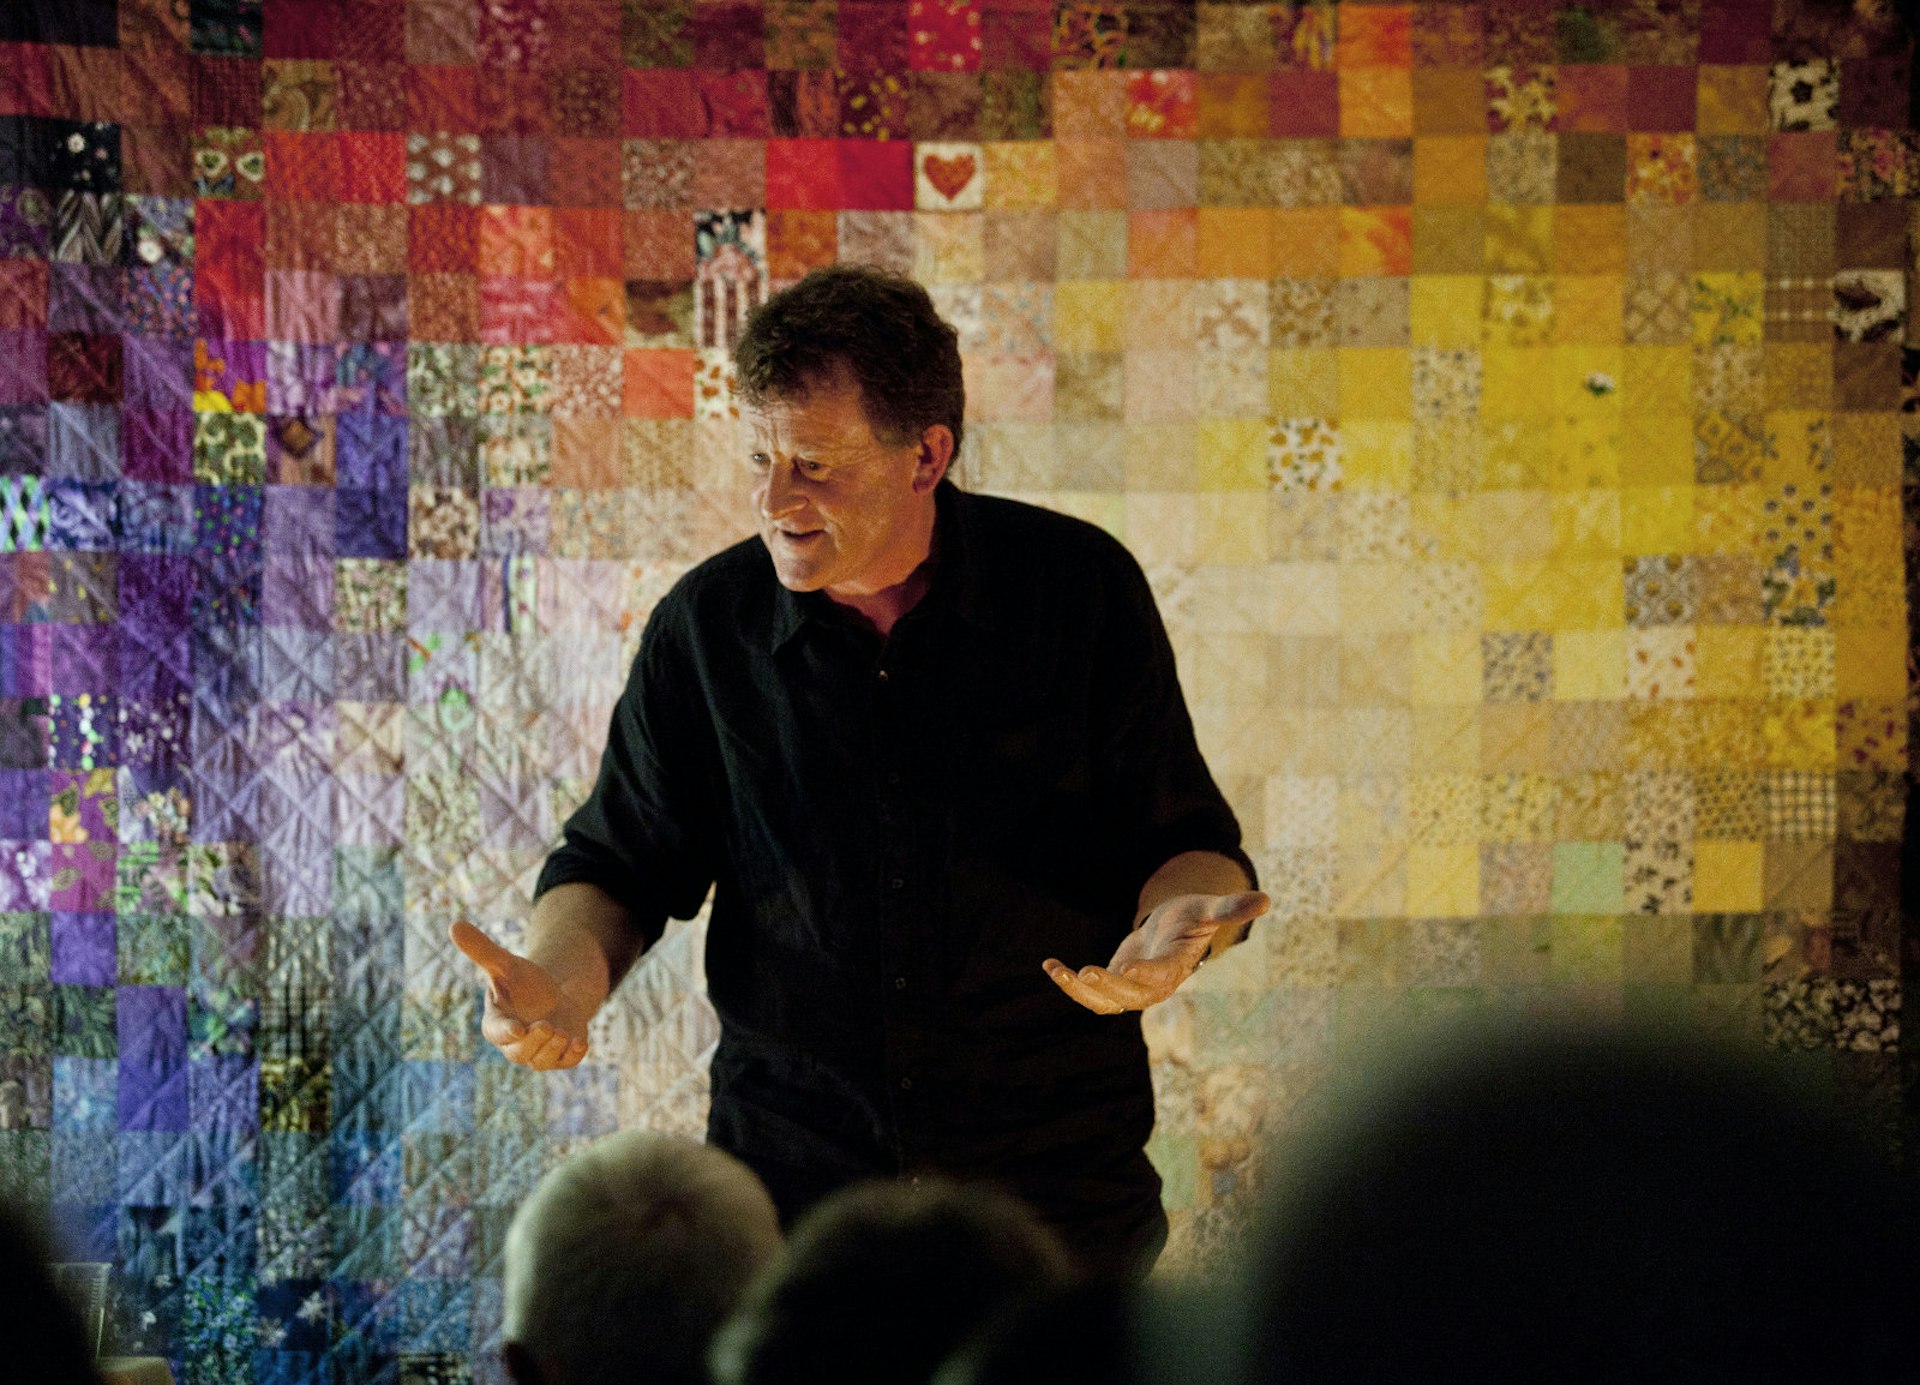 A man in black top and pants tells stories with his palms open to the audience, a multi-coloured patchwork quilt as a backdrop behind him